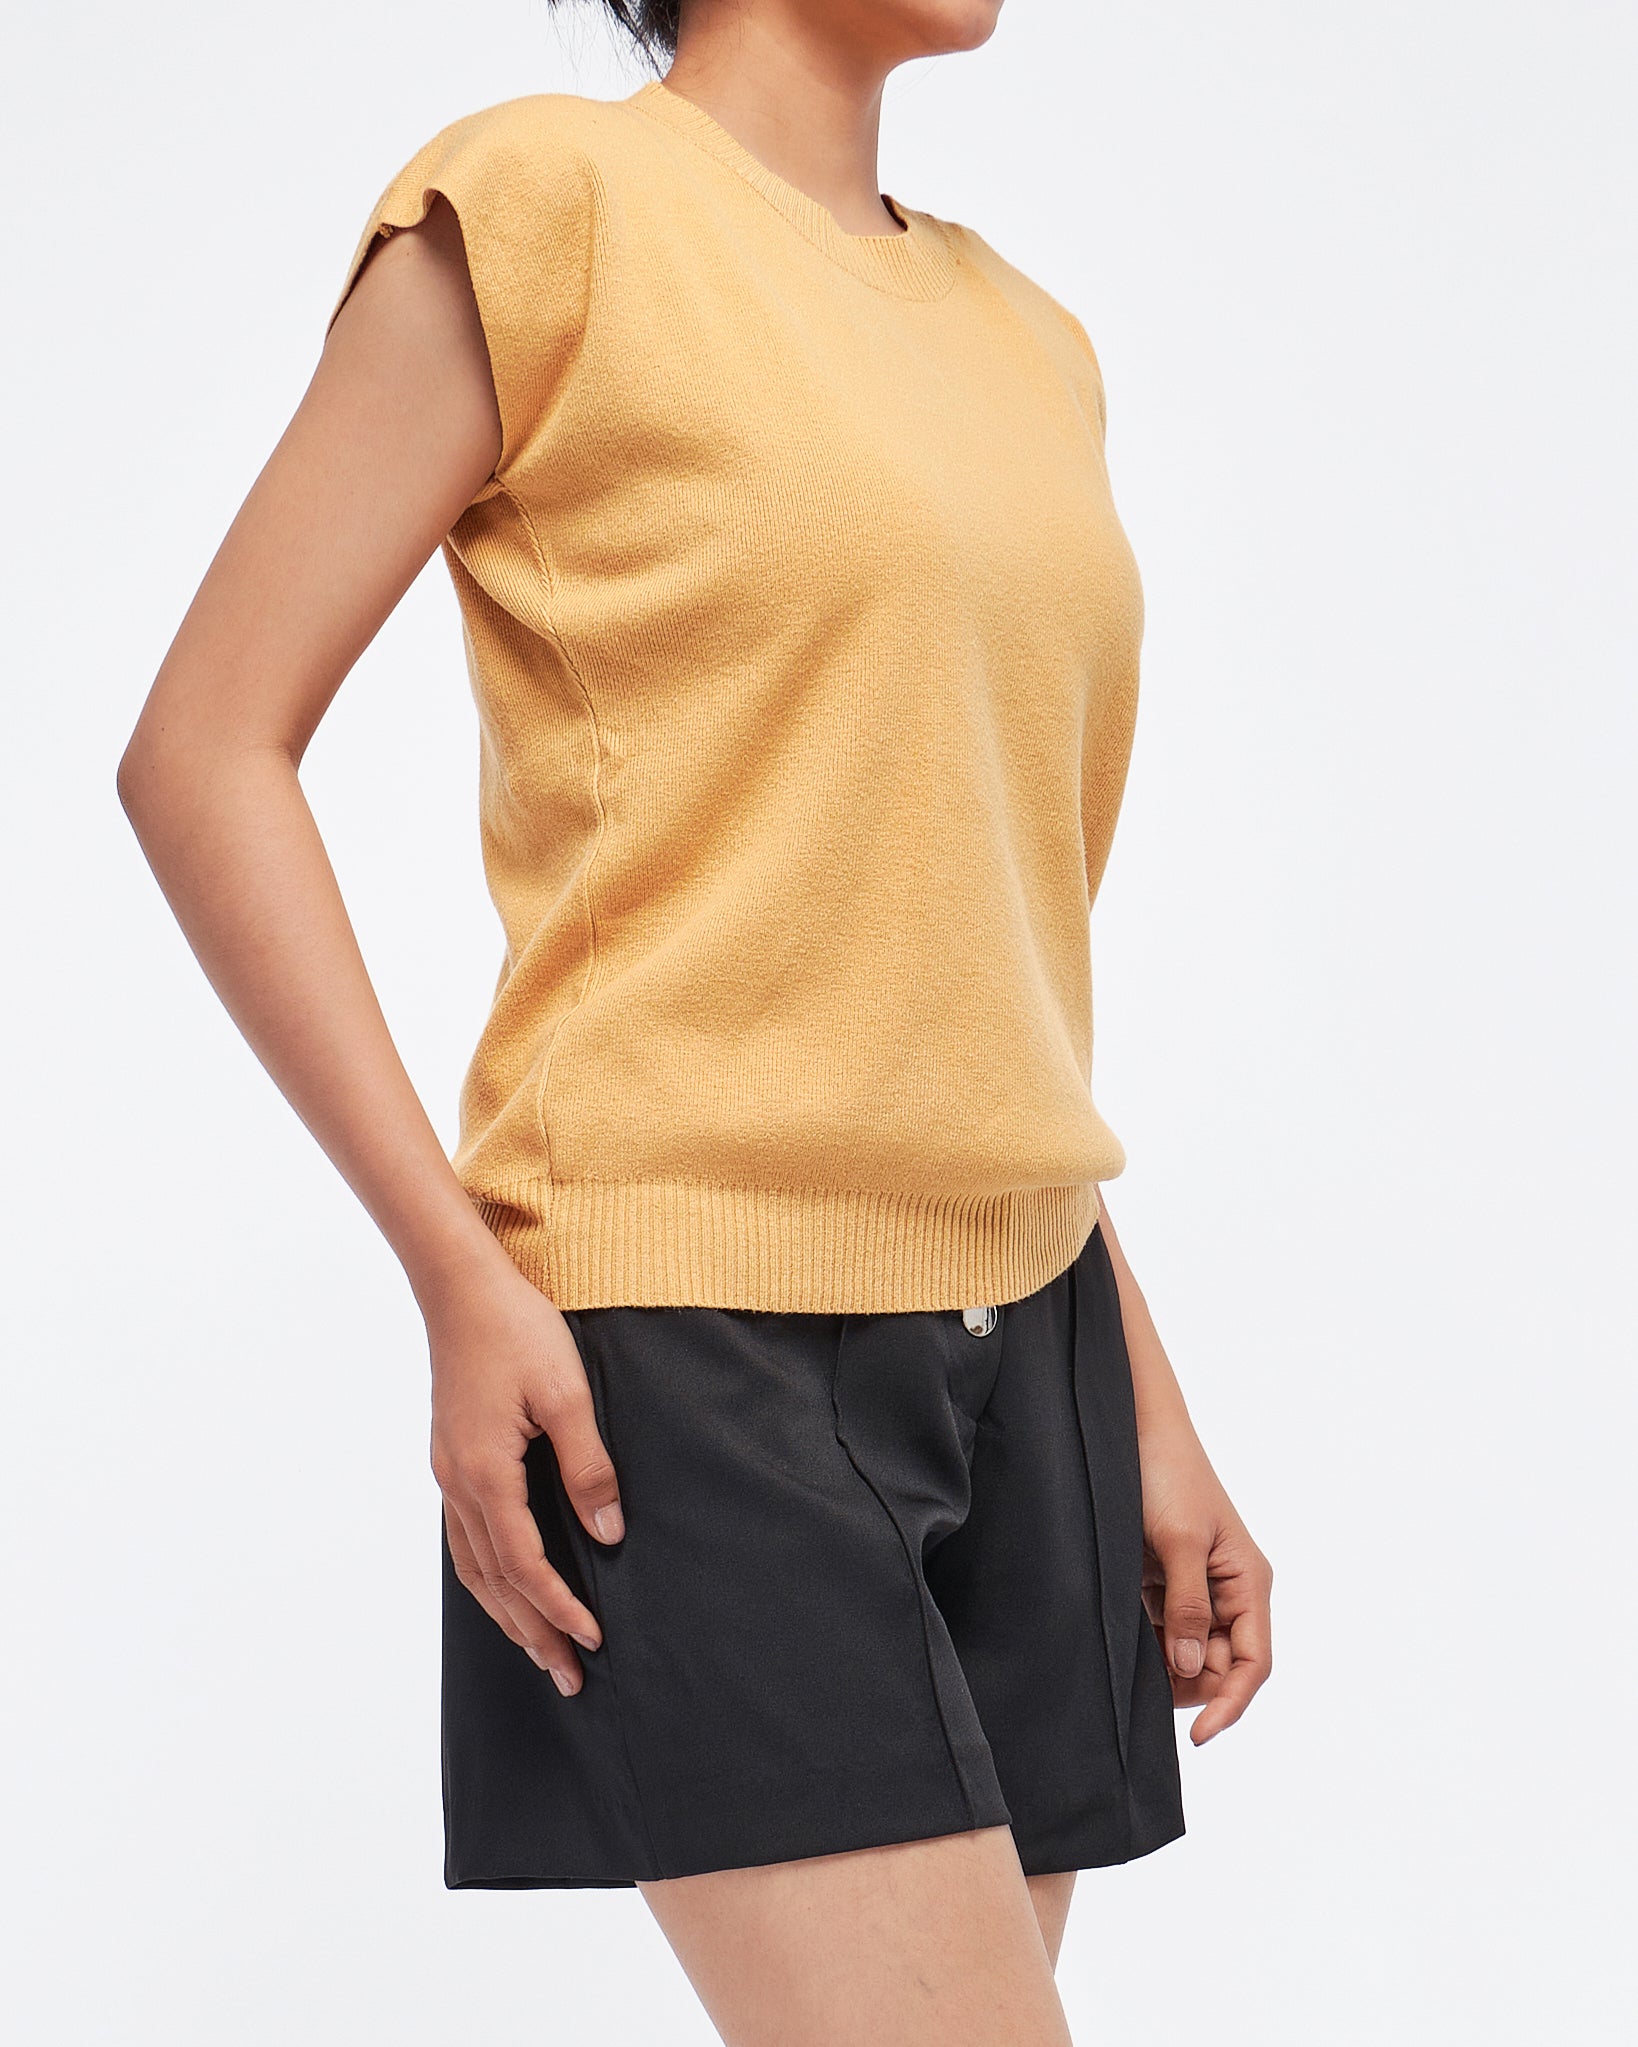 MOI OUTFIT-Soft Knit Lady Crop Top 10.90